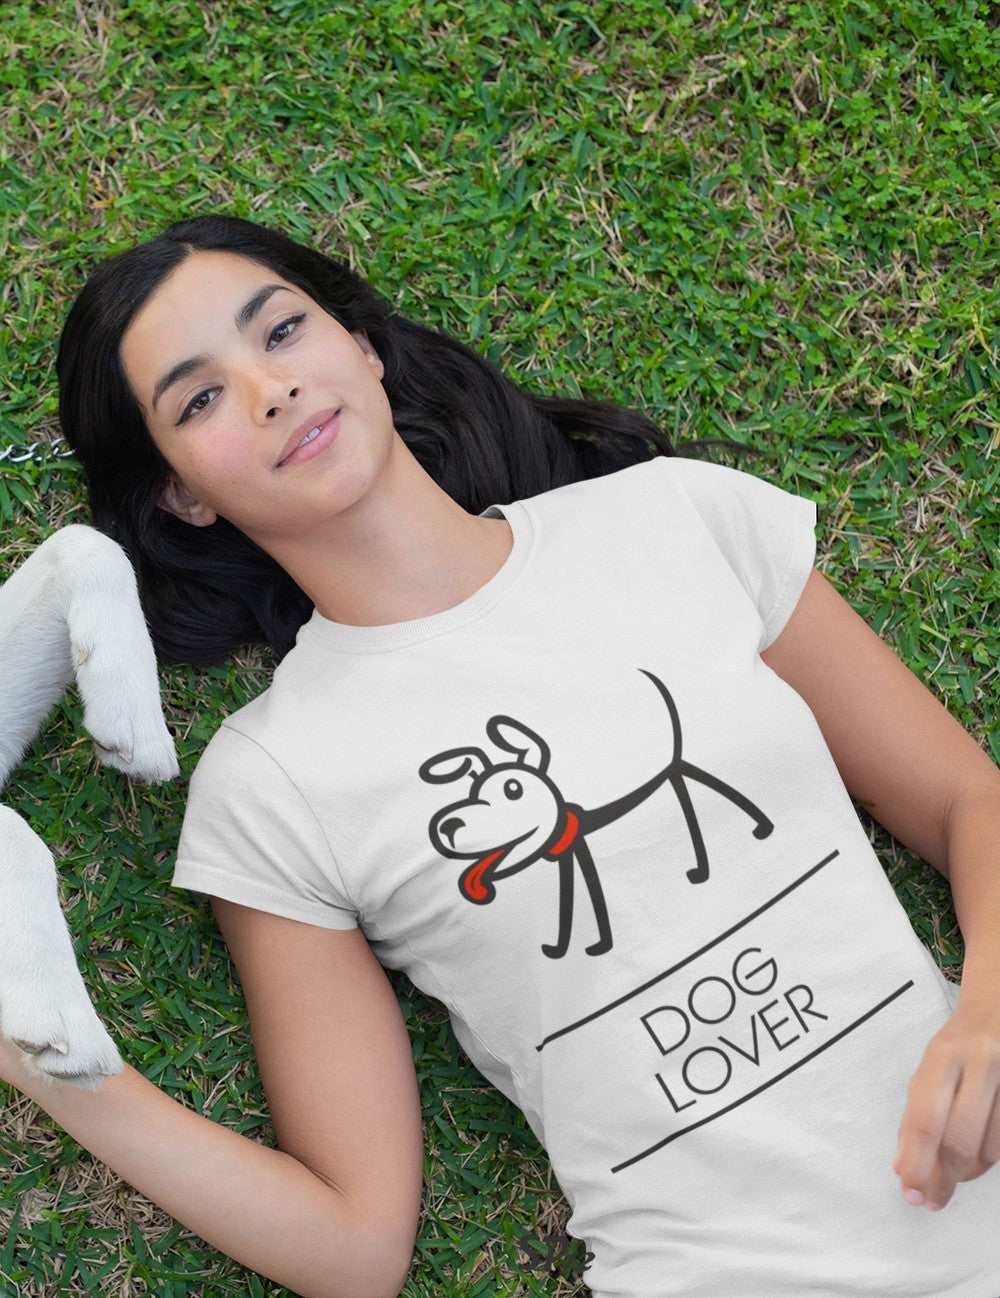 Dog Lover Gifts T Shirt